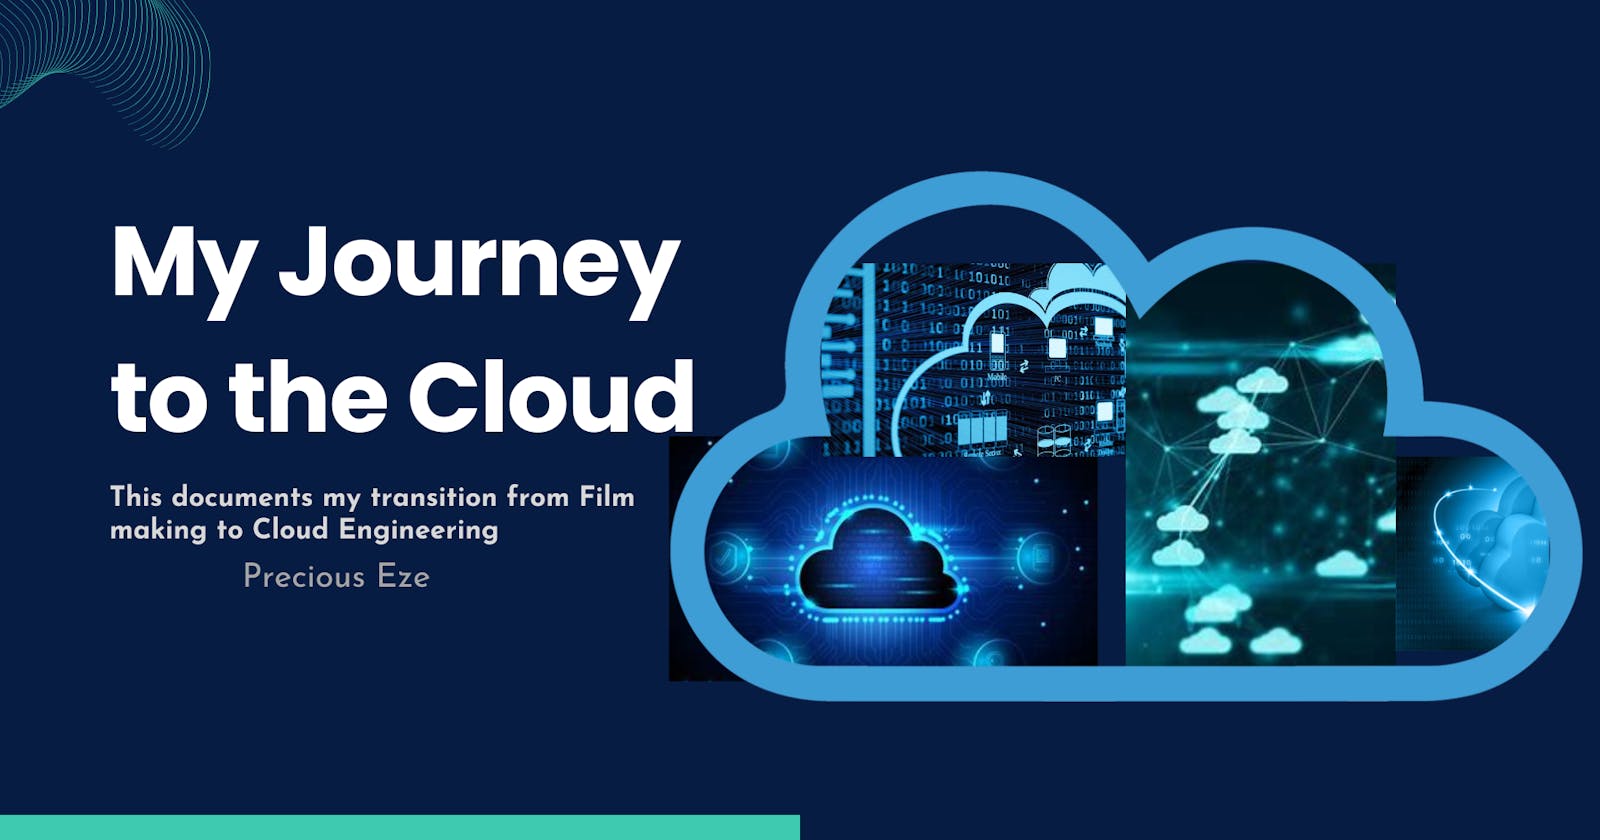 My Journey to the Cloud